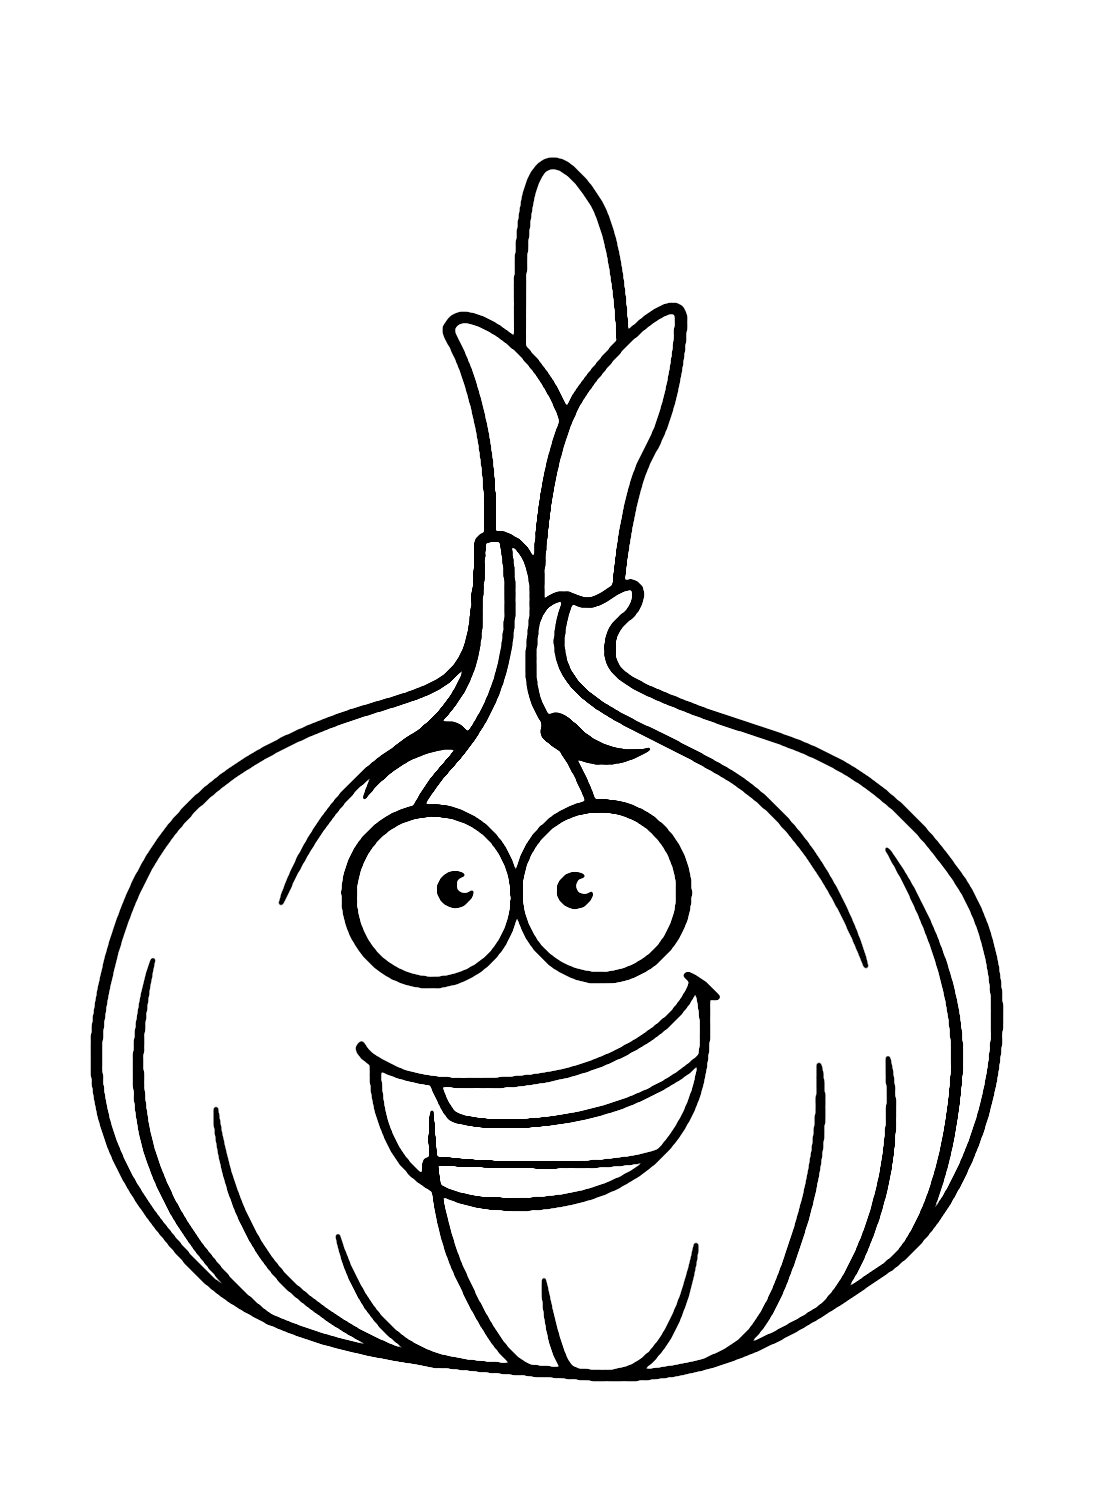 Happy Onion Coloring Page